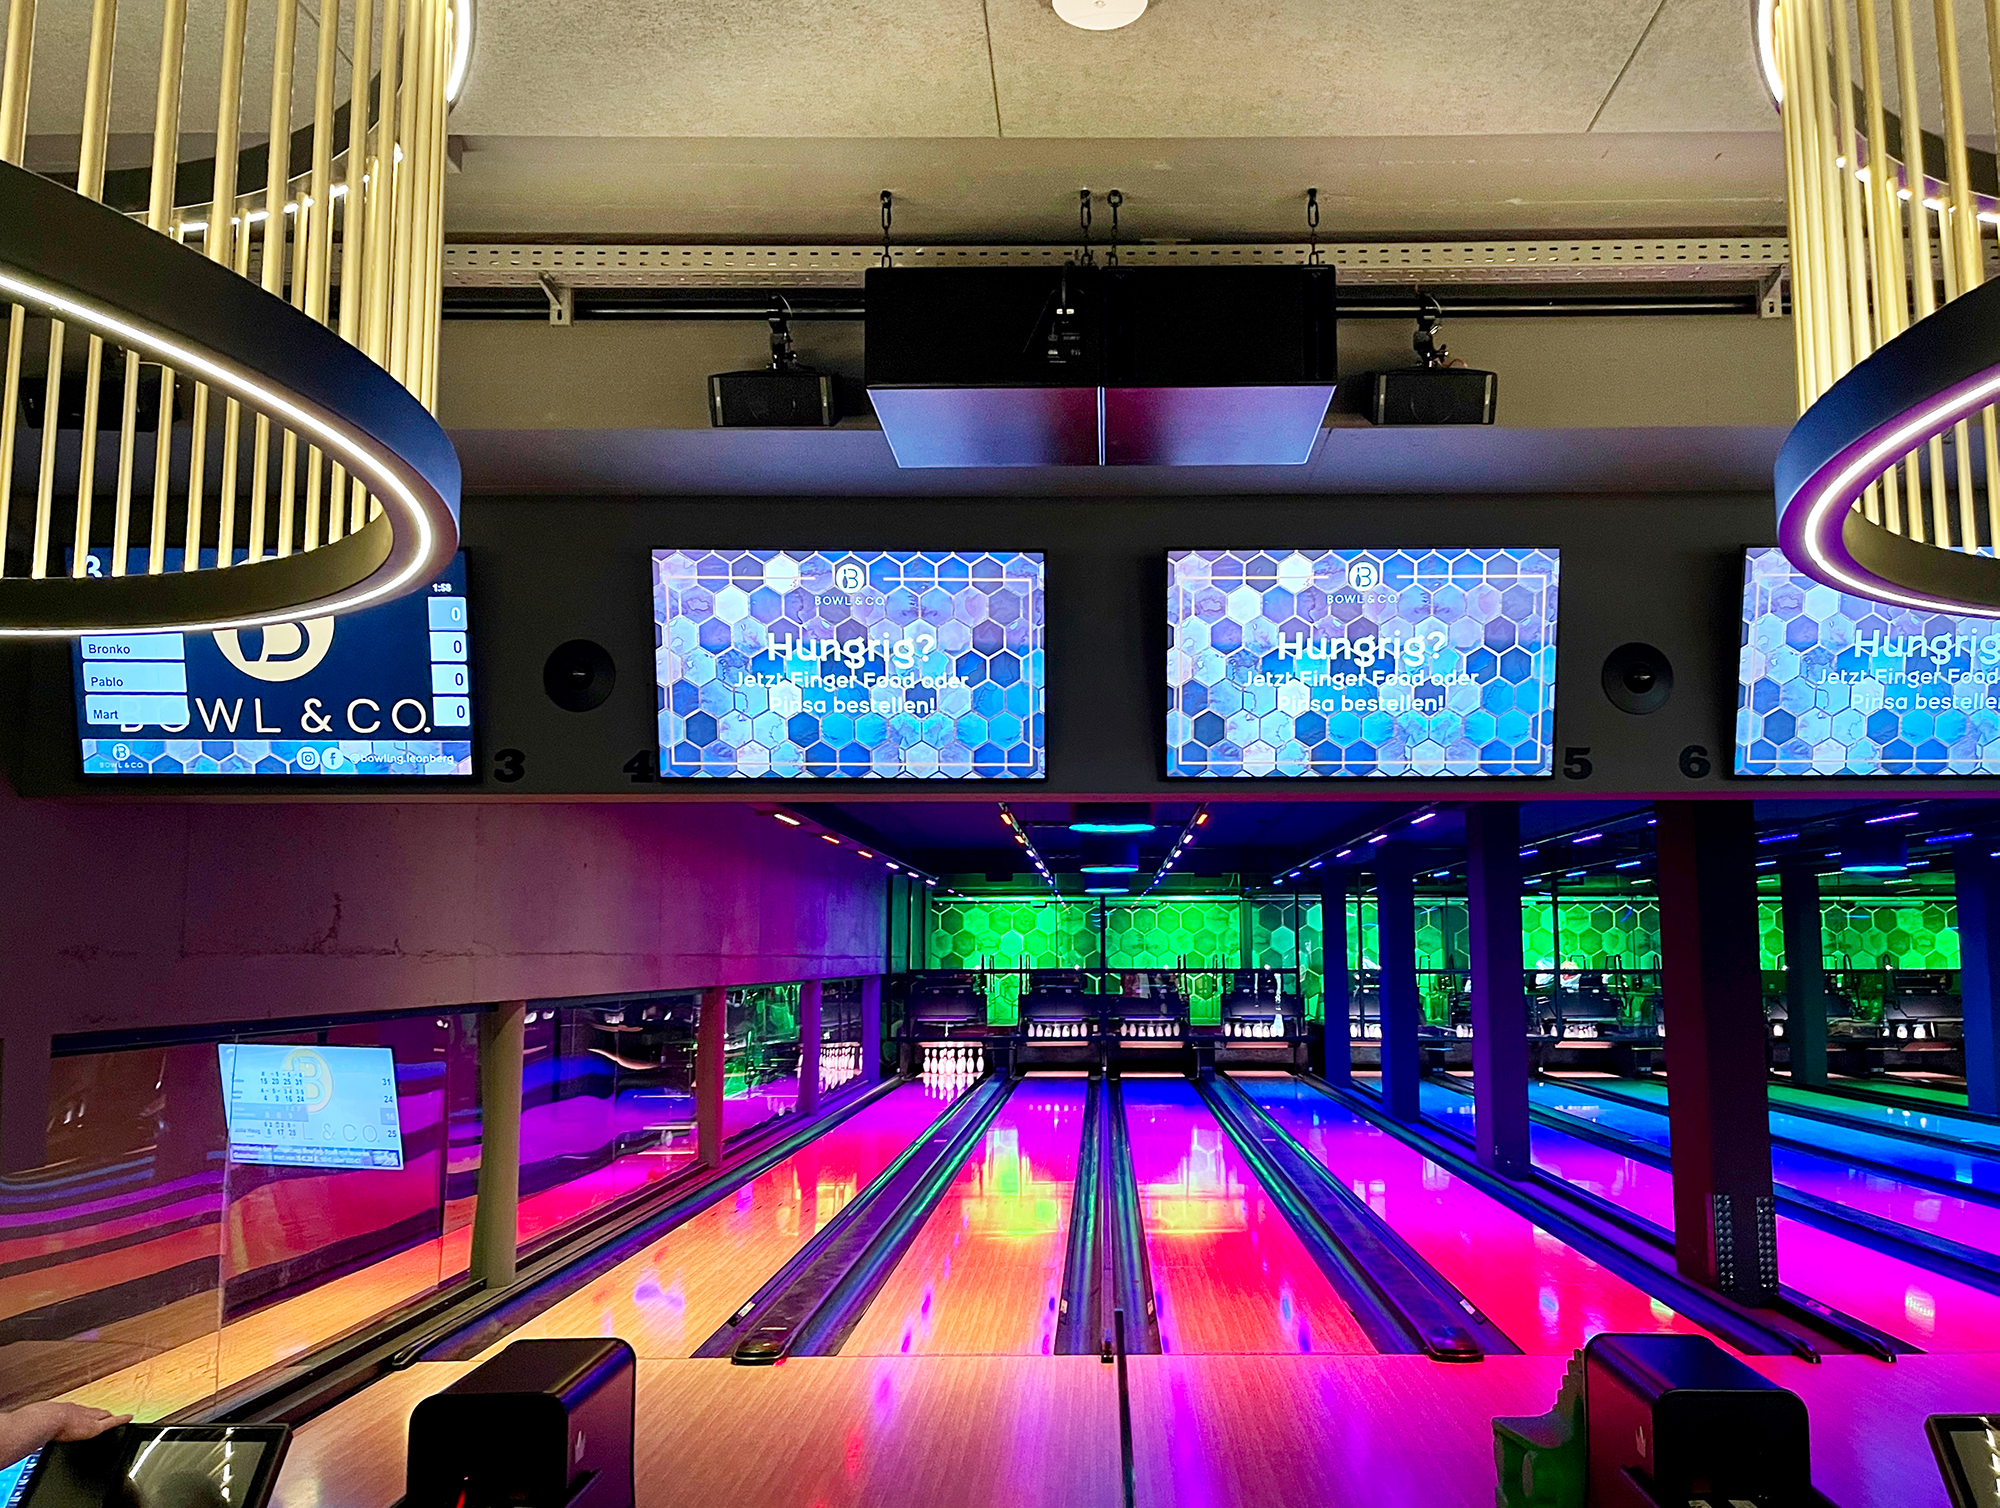 NEXO sound ups the game at Bowl & Co in Leonberg